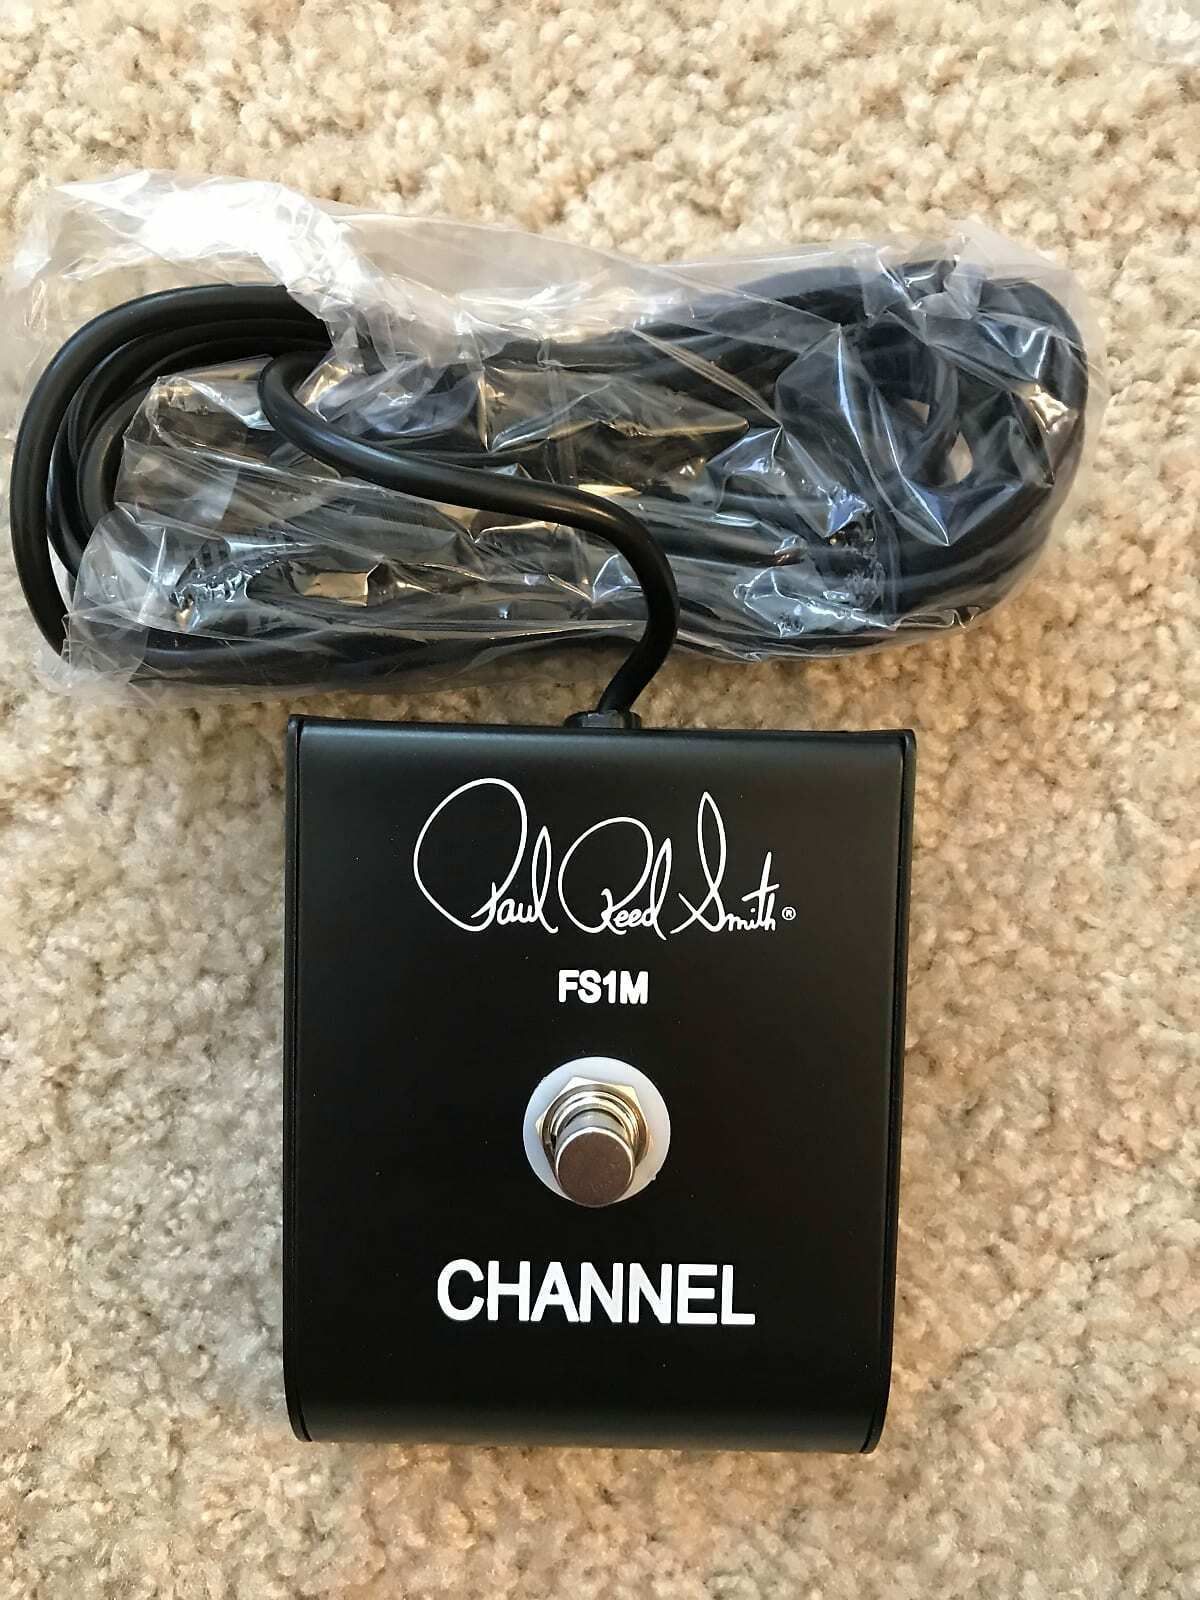 PRS FSTM footswitch For M15 AMPS and others